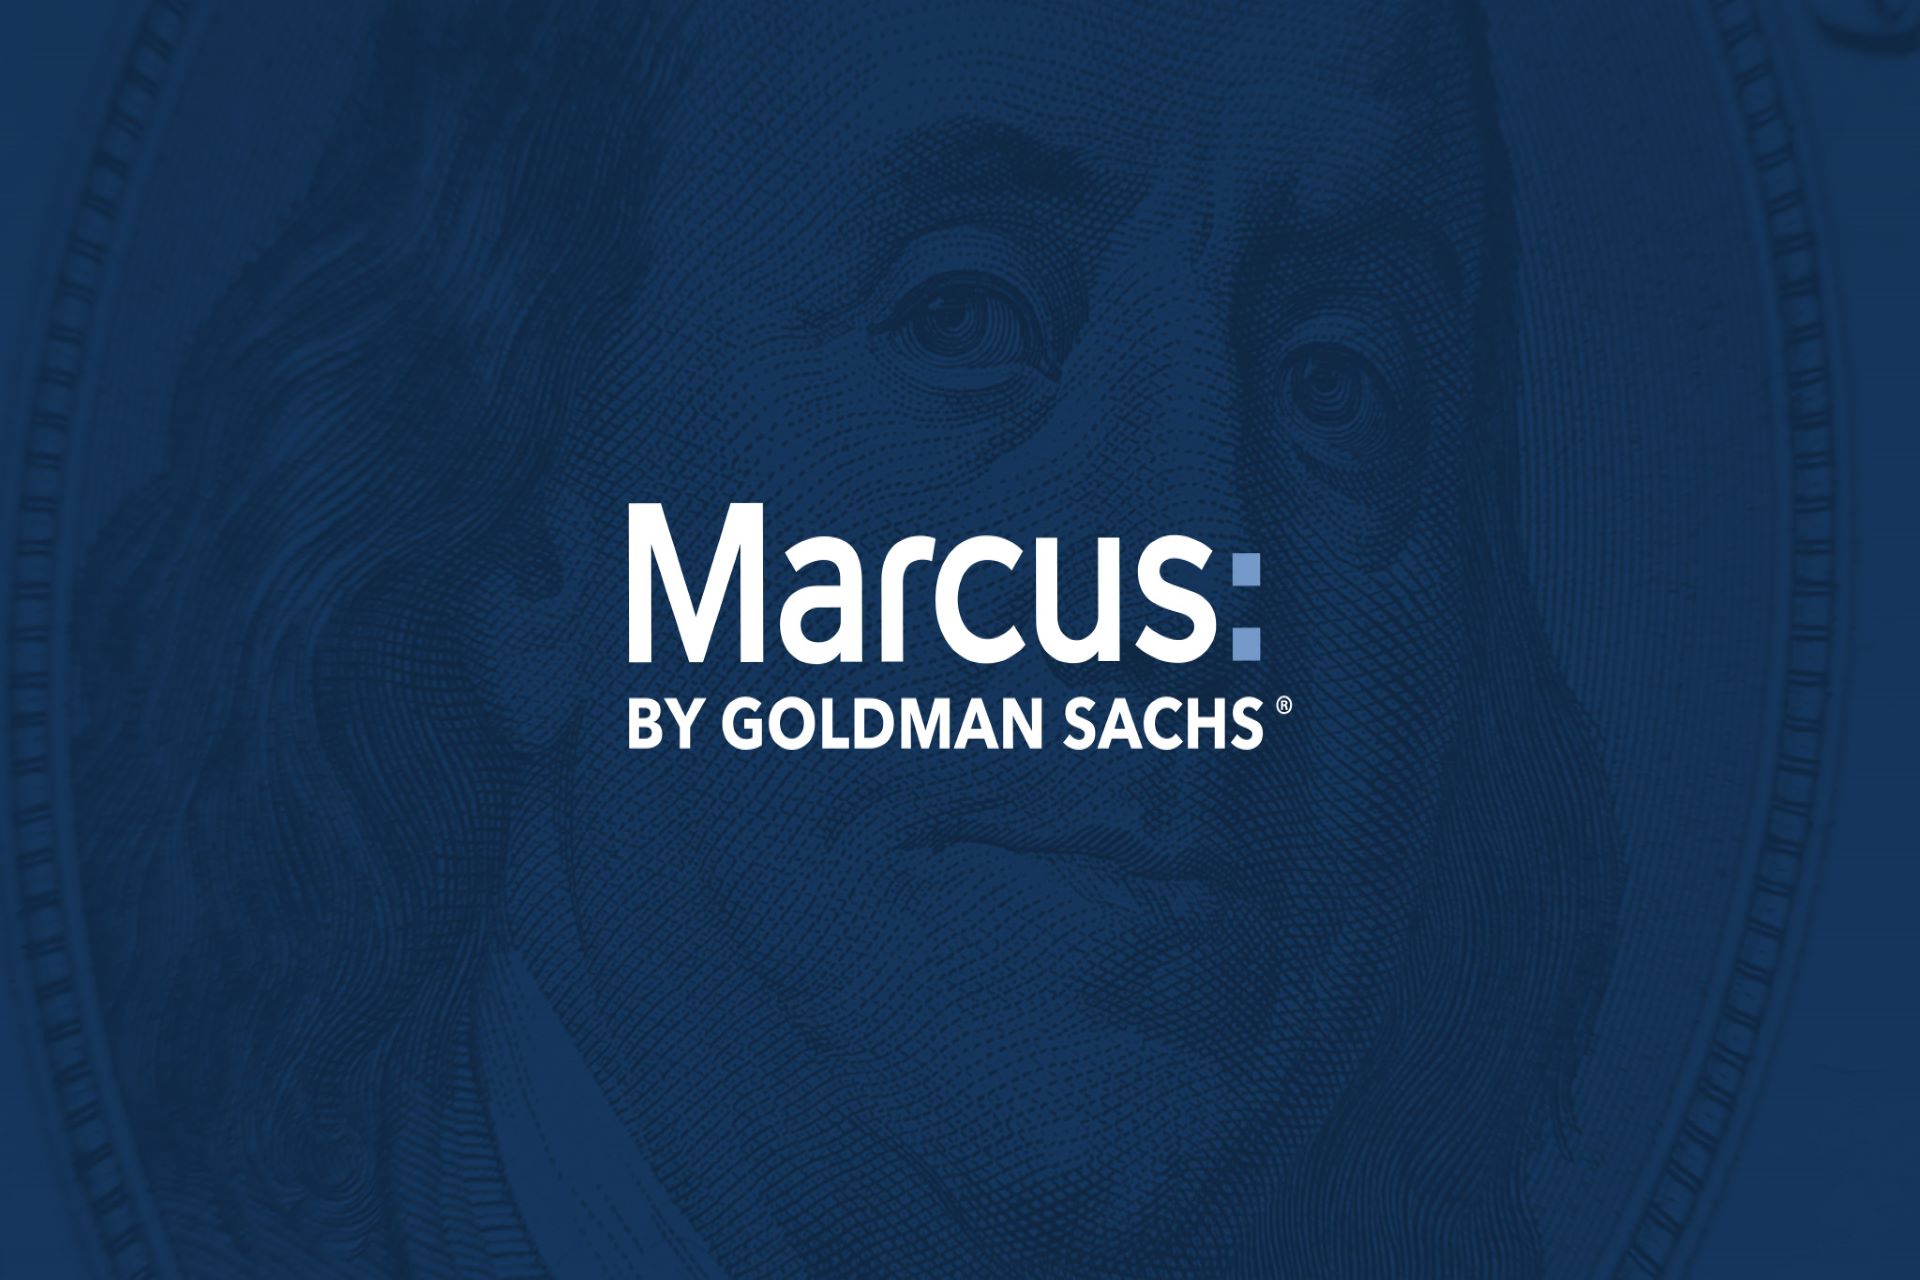 goldman-sachs-to-launch-marcus-credit-card